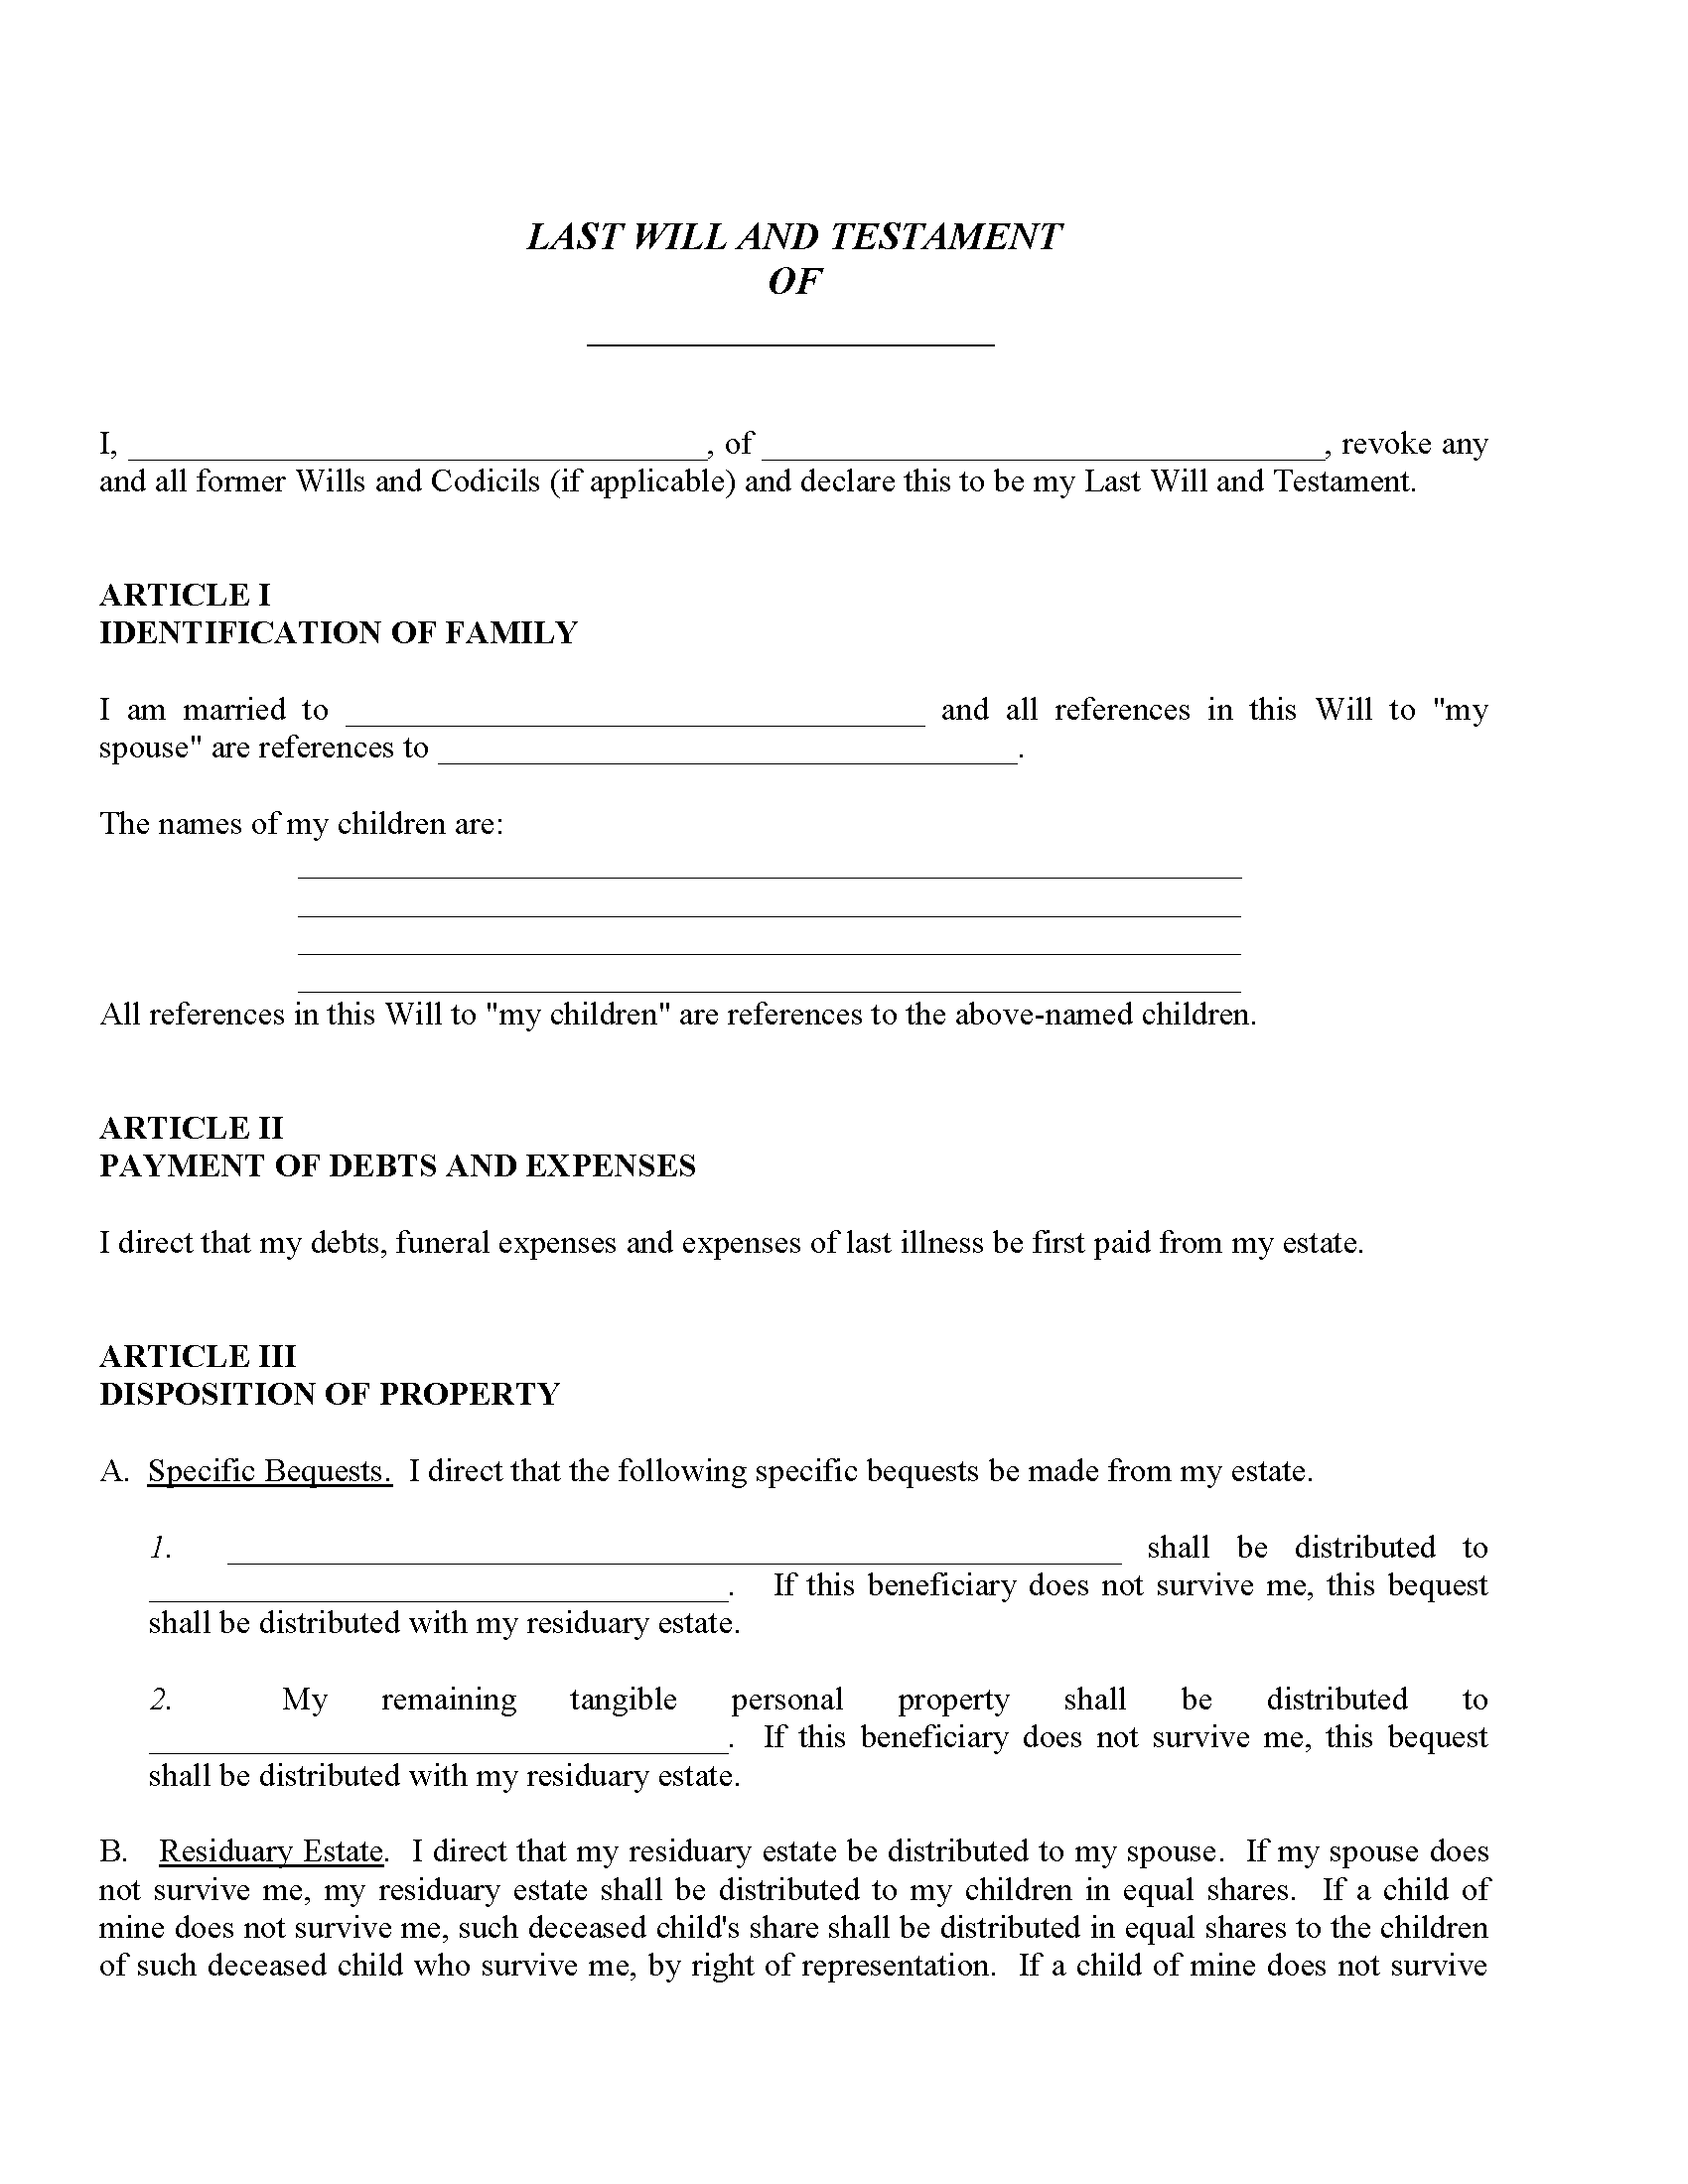 mississippi-last-will-and-testament-free-printable-legal-forms